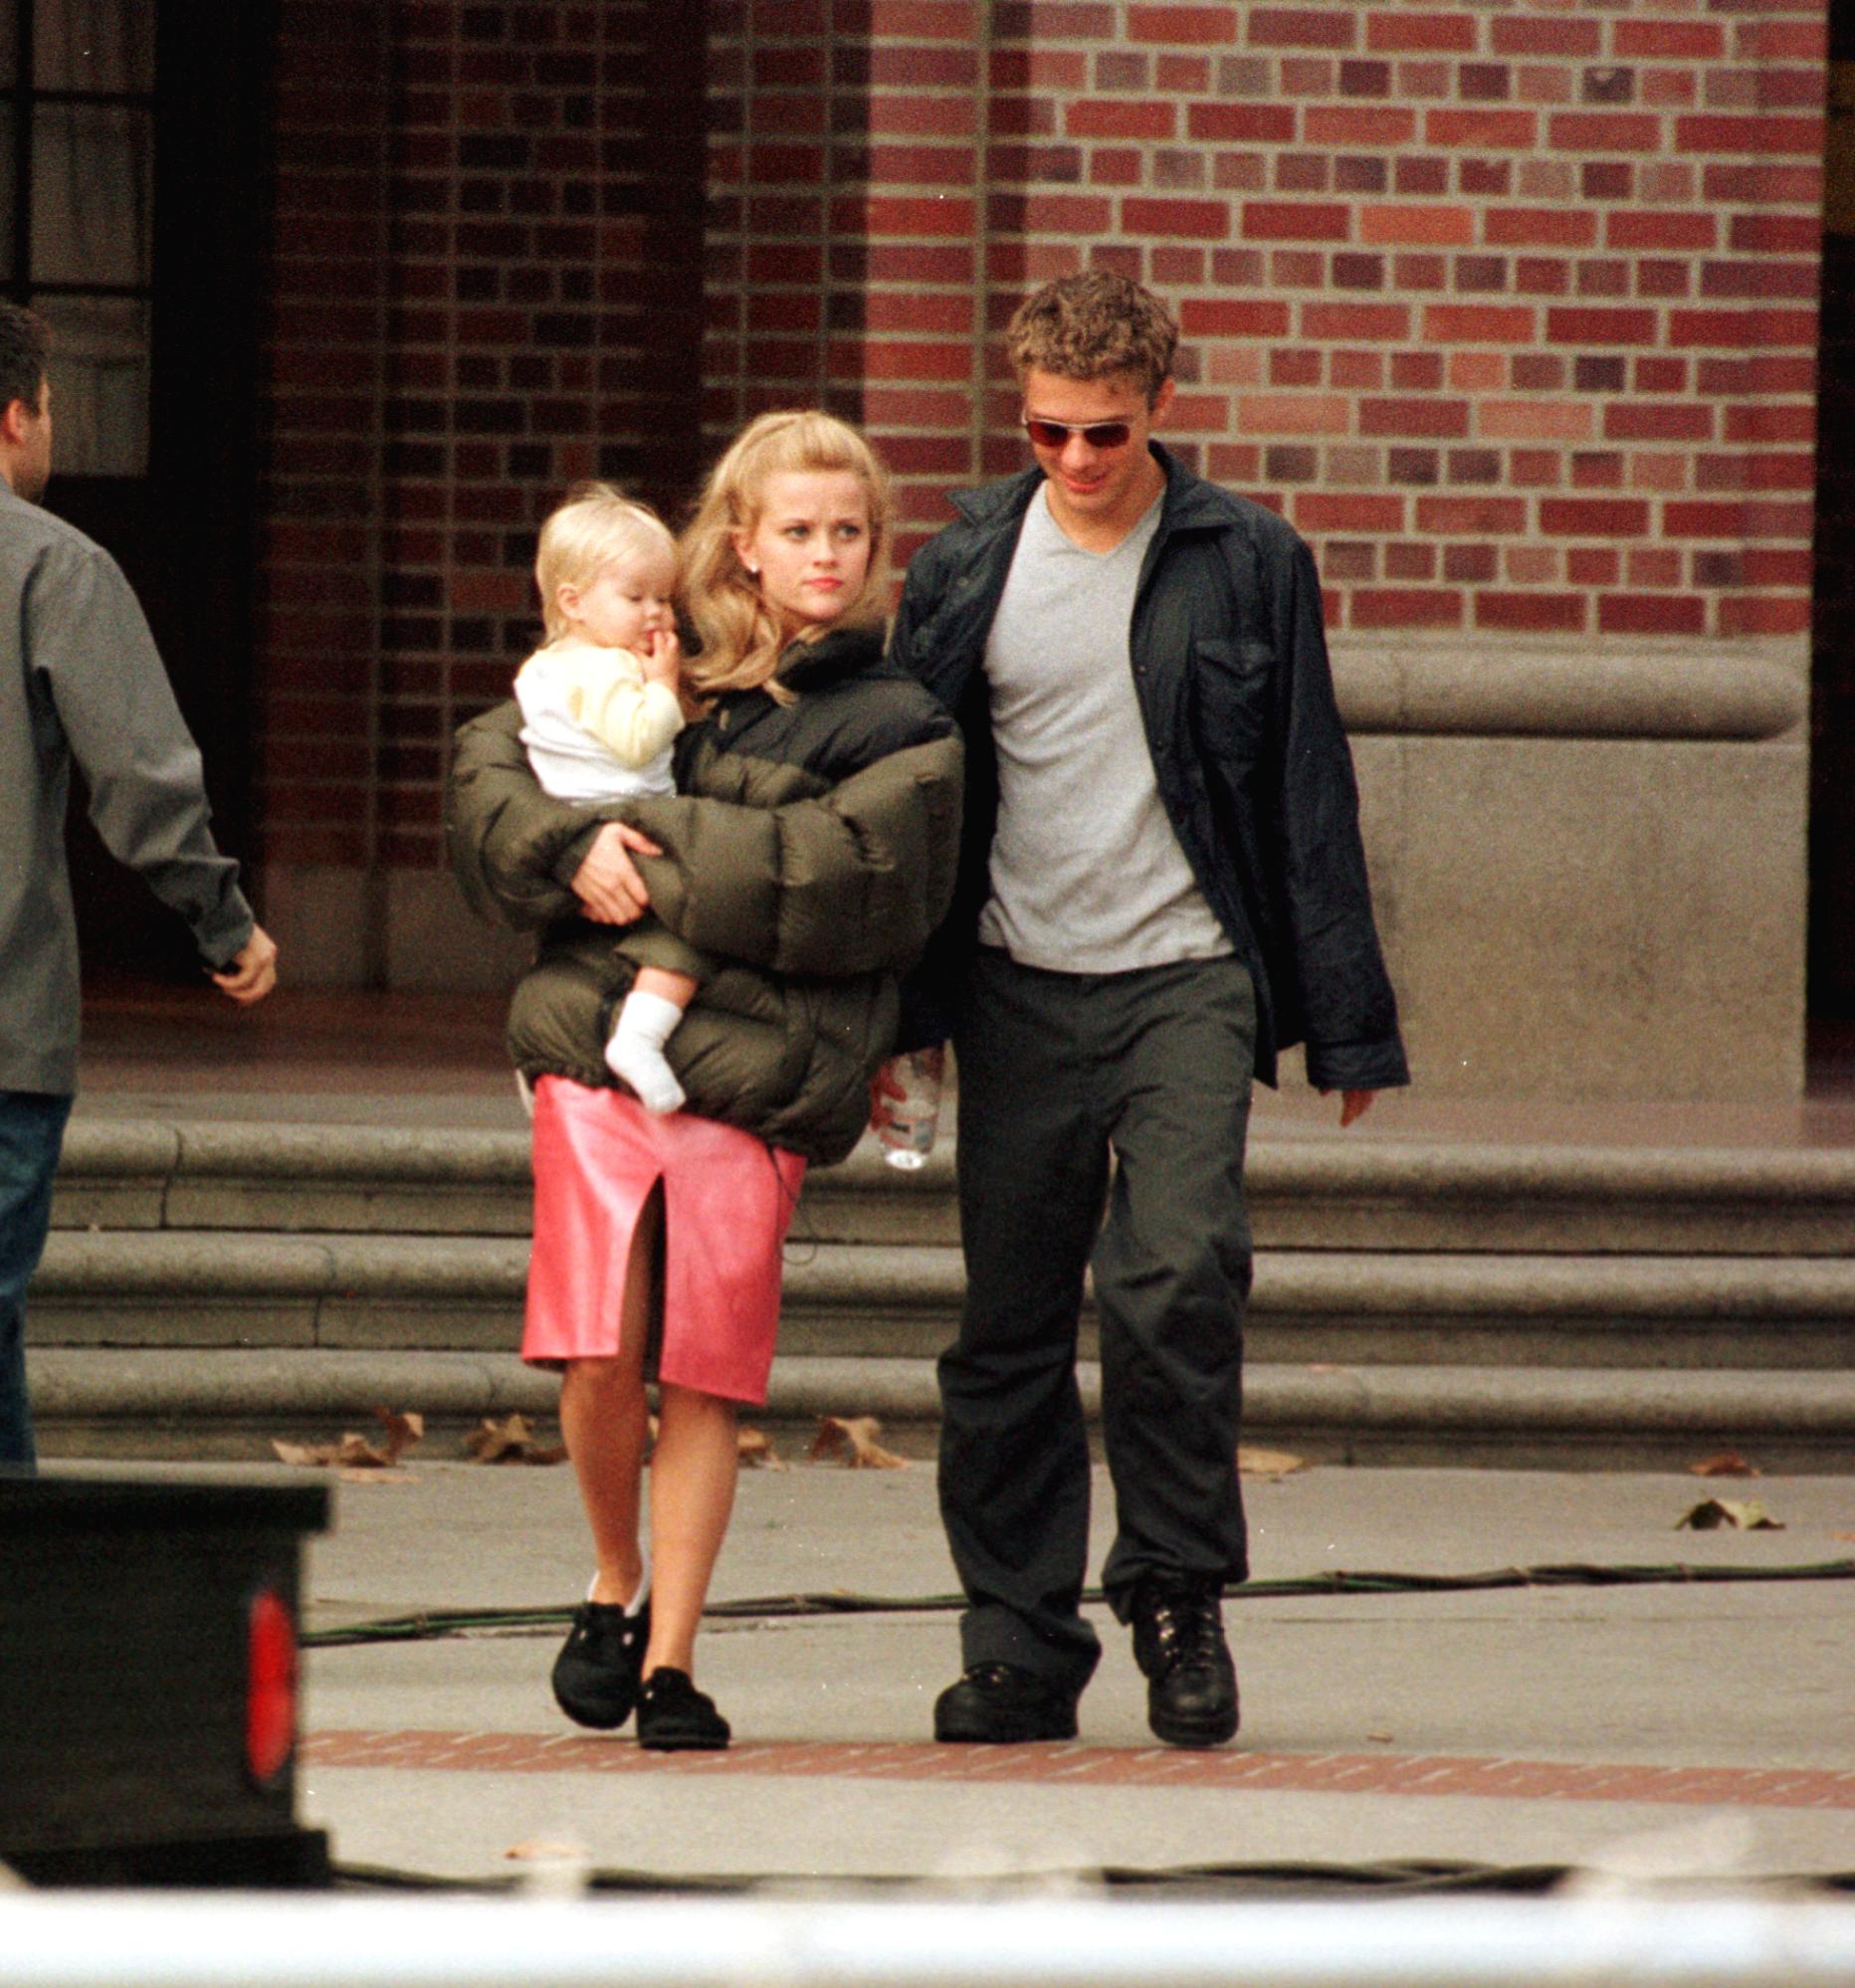 Reese Witherspoon and Ryan Phillippe with their child in Los Angeles in 2000 | Source: Getty Images